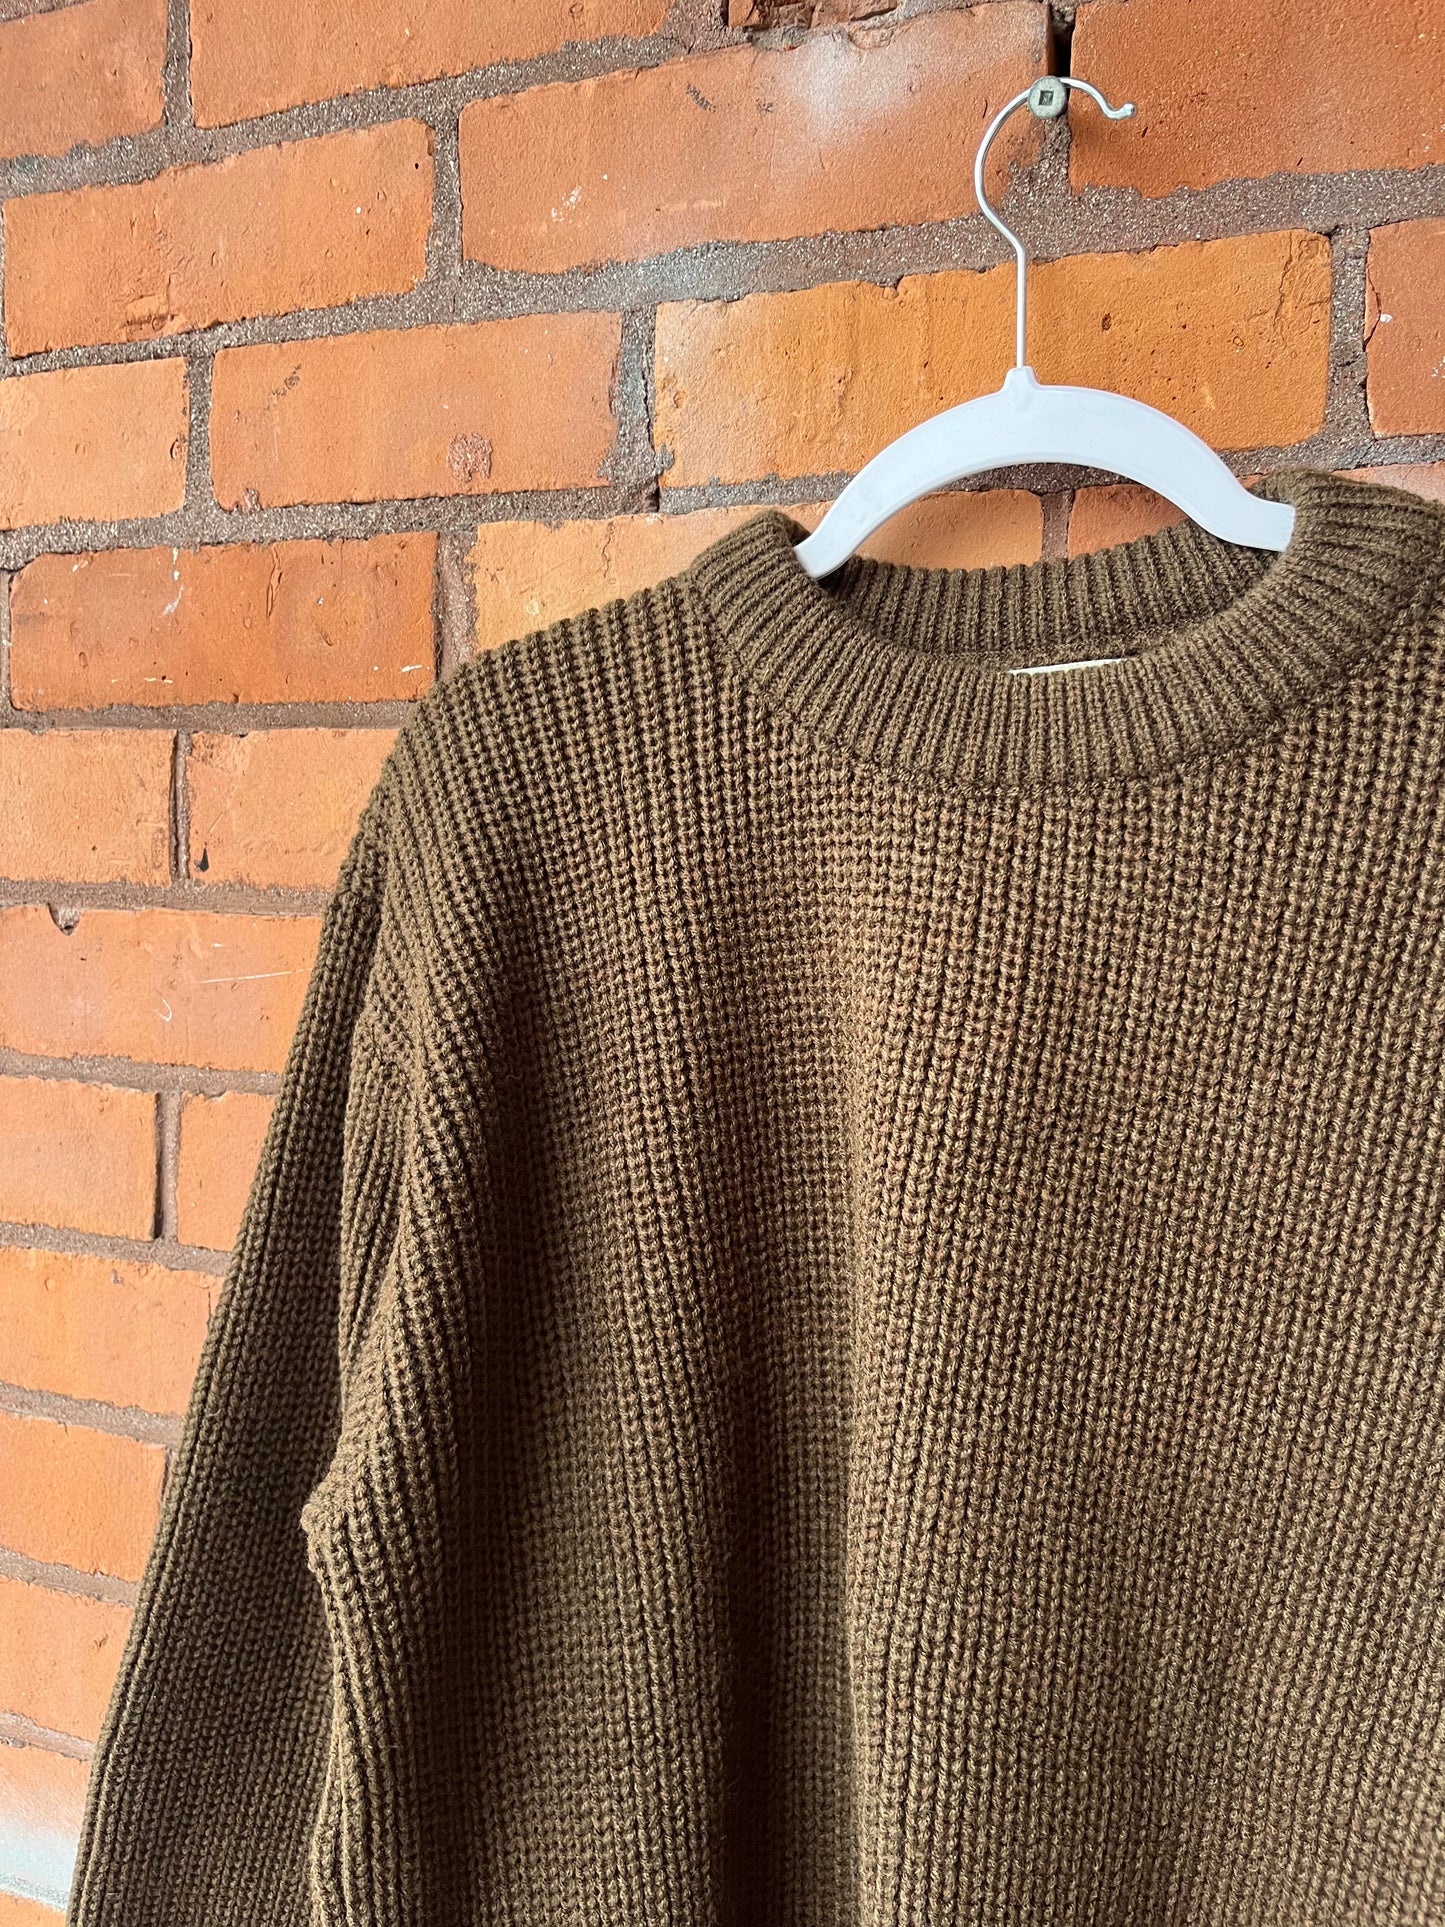 90’s Vintage Brown Chunky Knit Sweater / Size XL